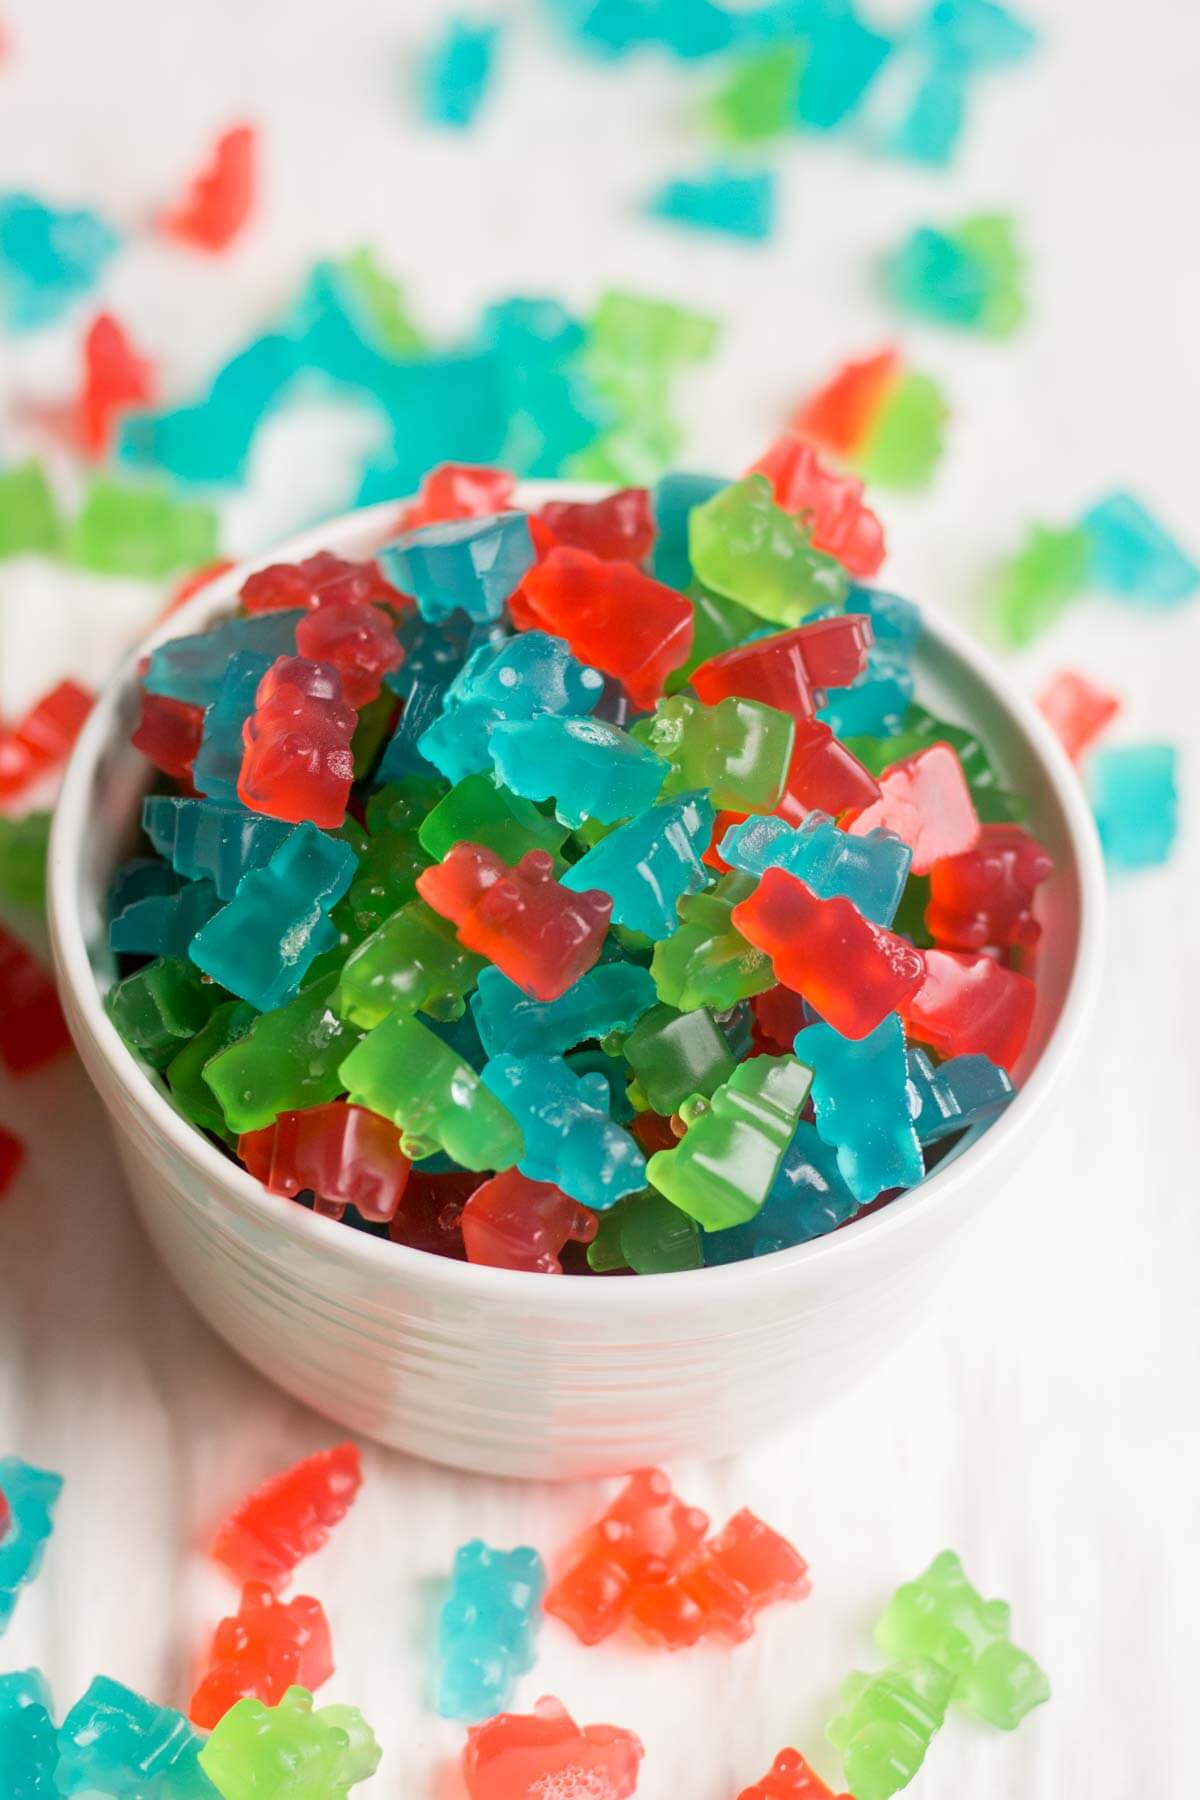 Do delta-9 gummies contain natural flavors or sweeteners?